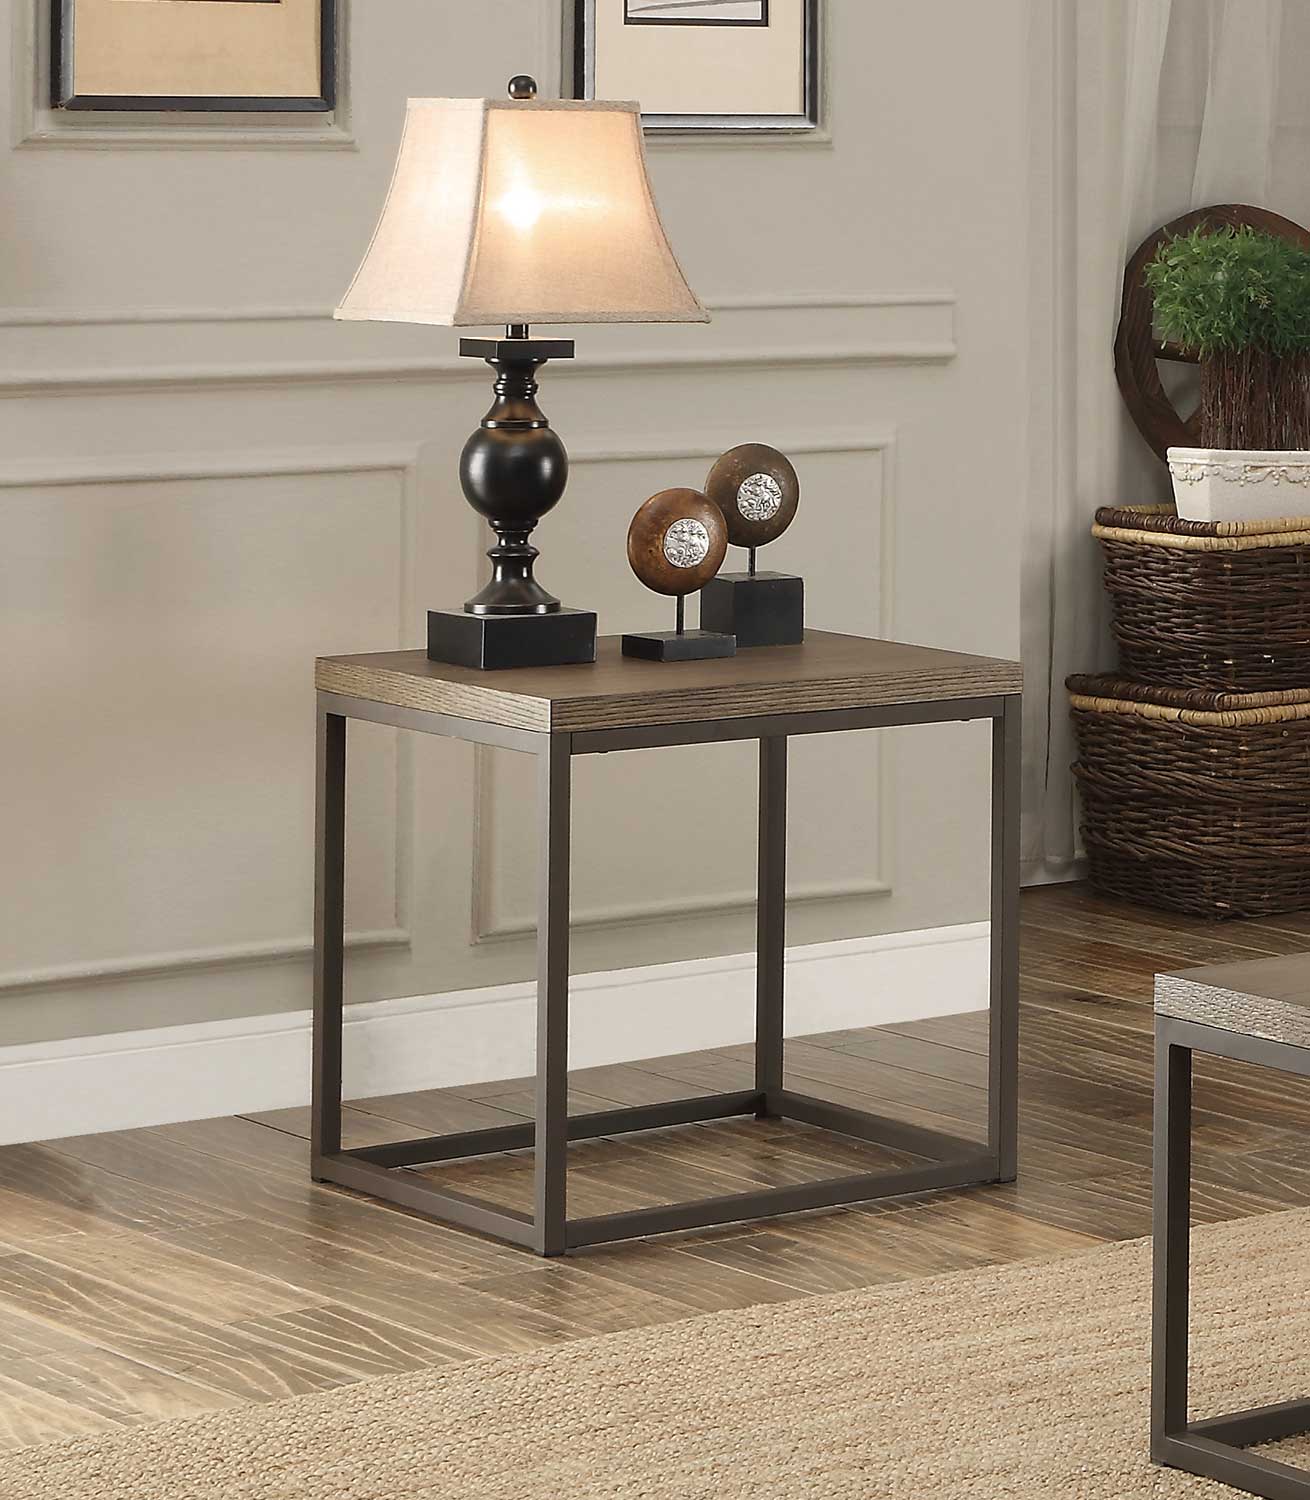 Homelegance Daria End Table - Weathered Wood Table Top with Metal Framing